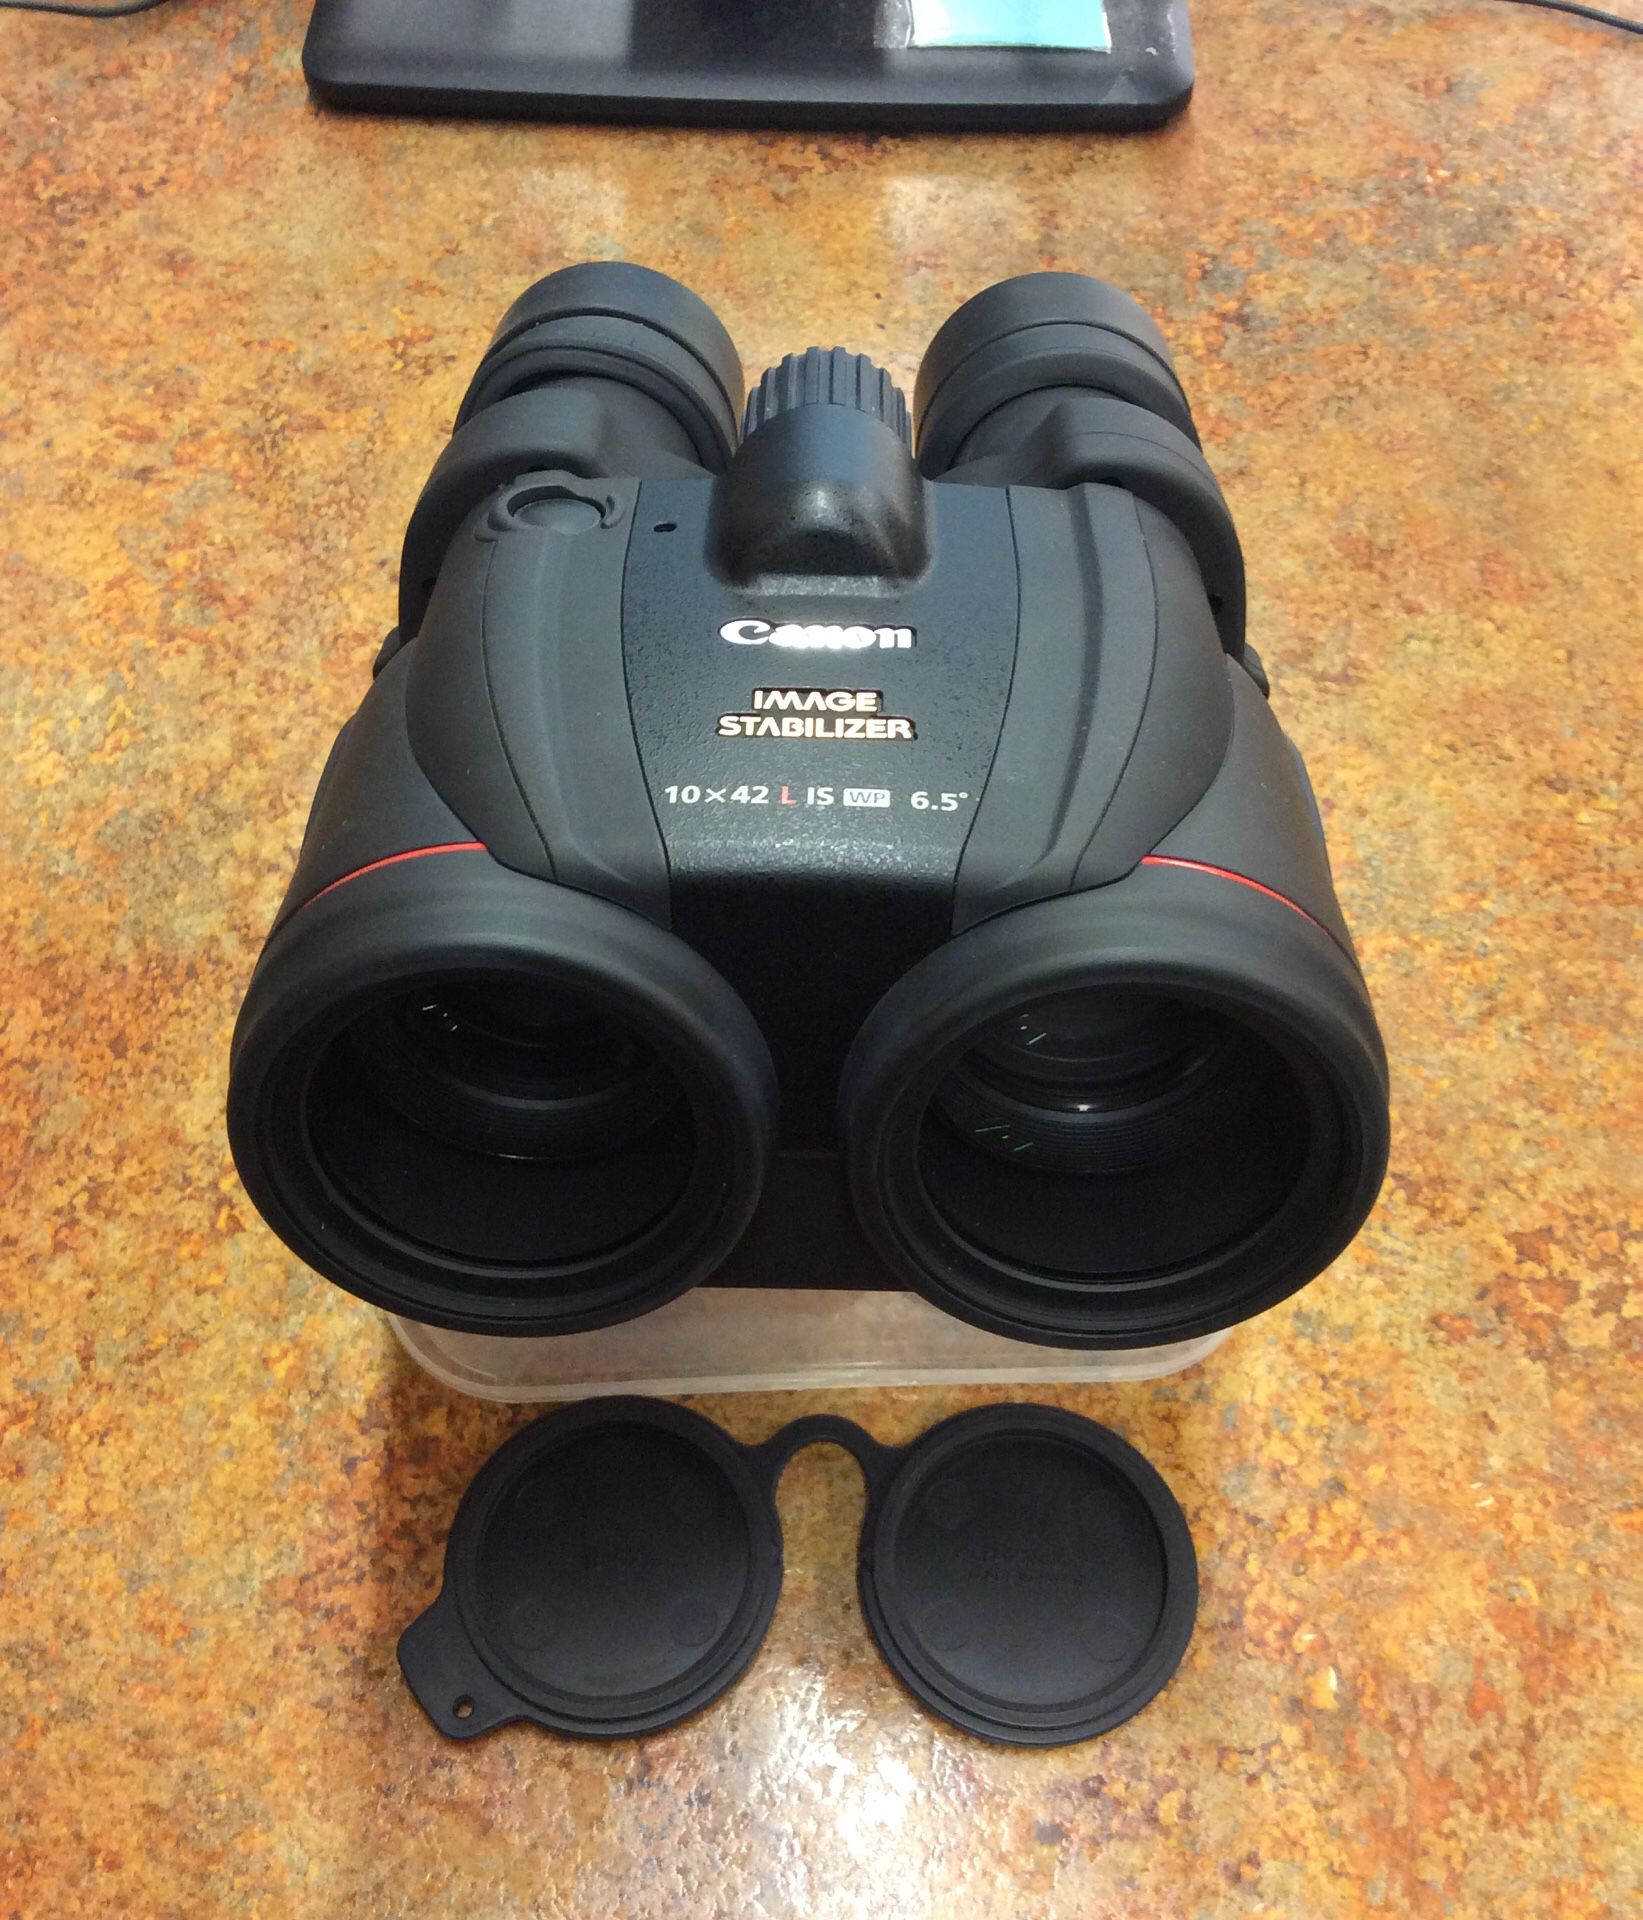 Canon 10x42 L IS WP Image Stabilized Binoculars for Sale in